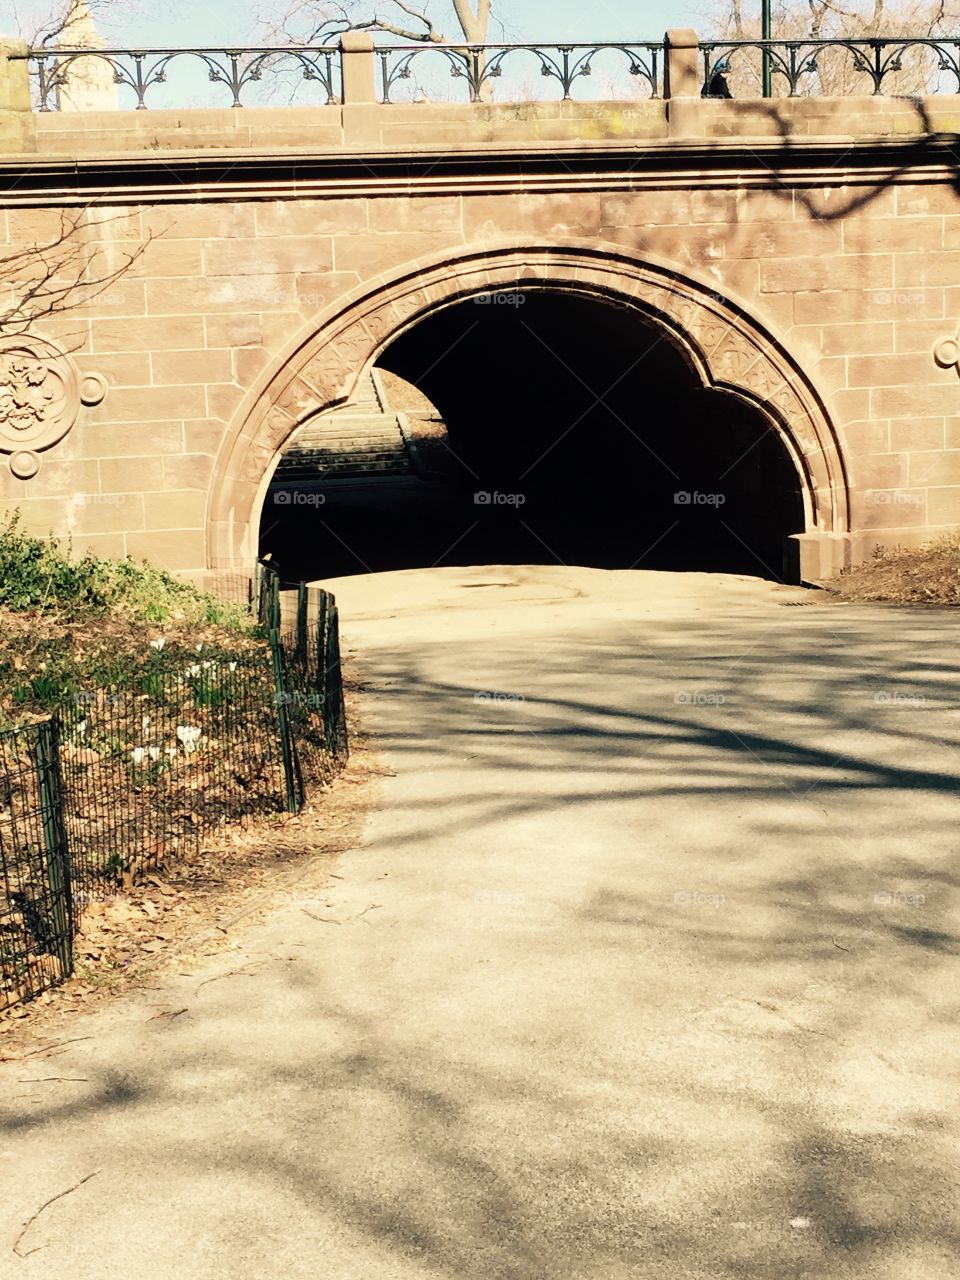 Tunnel. Tunnel in Central Park